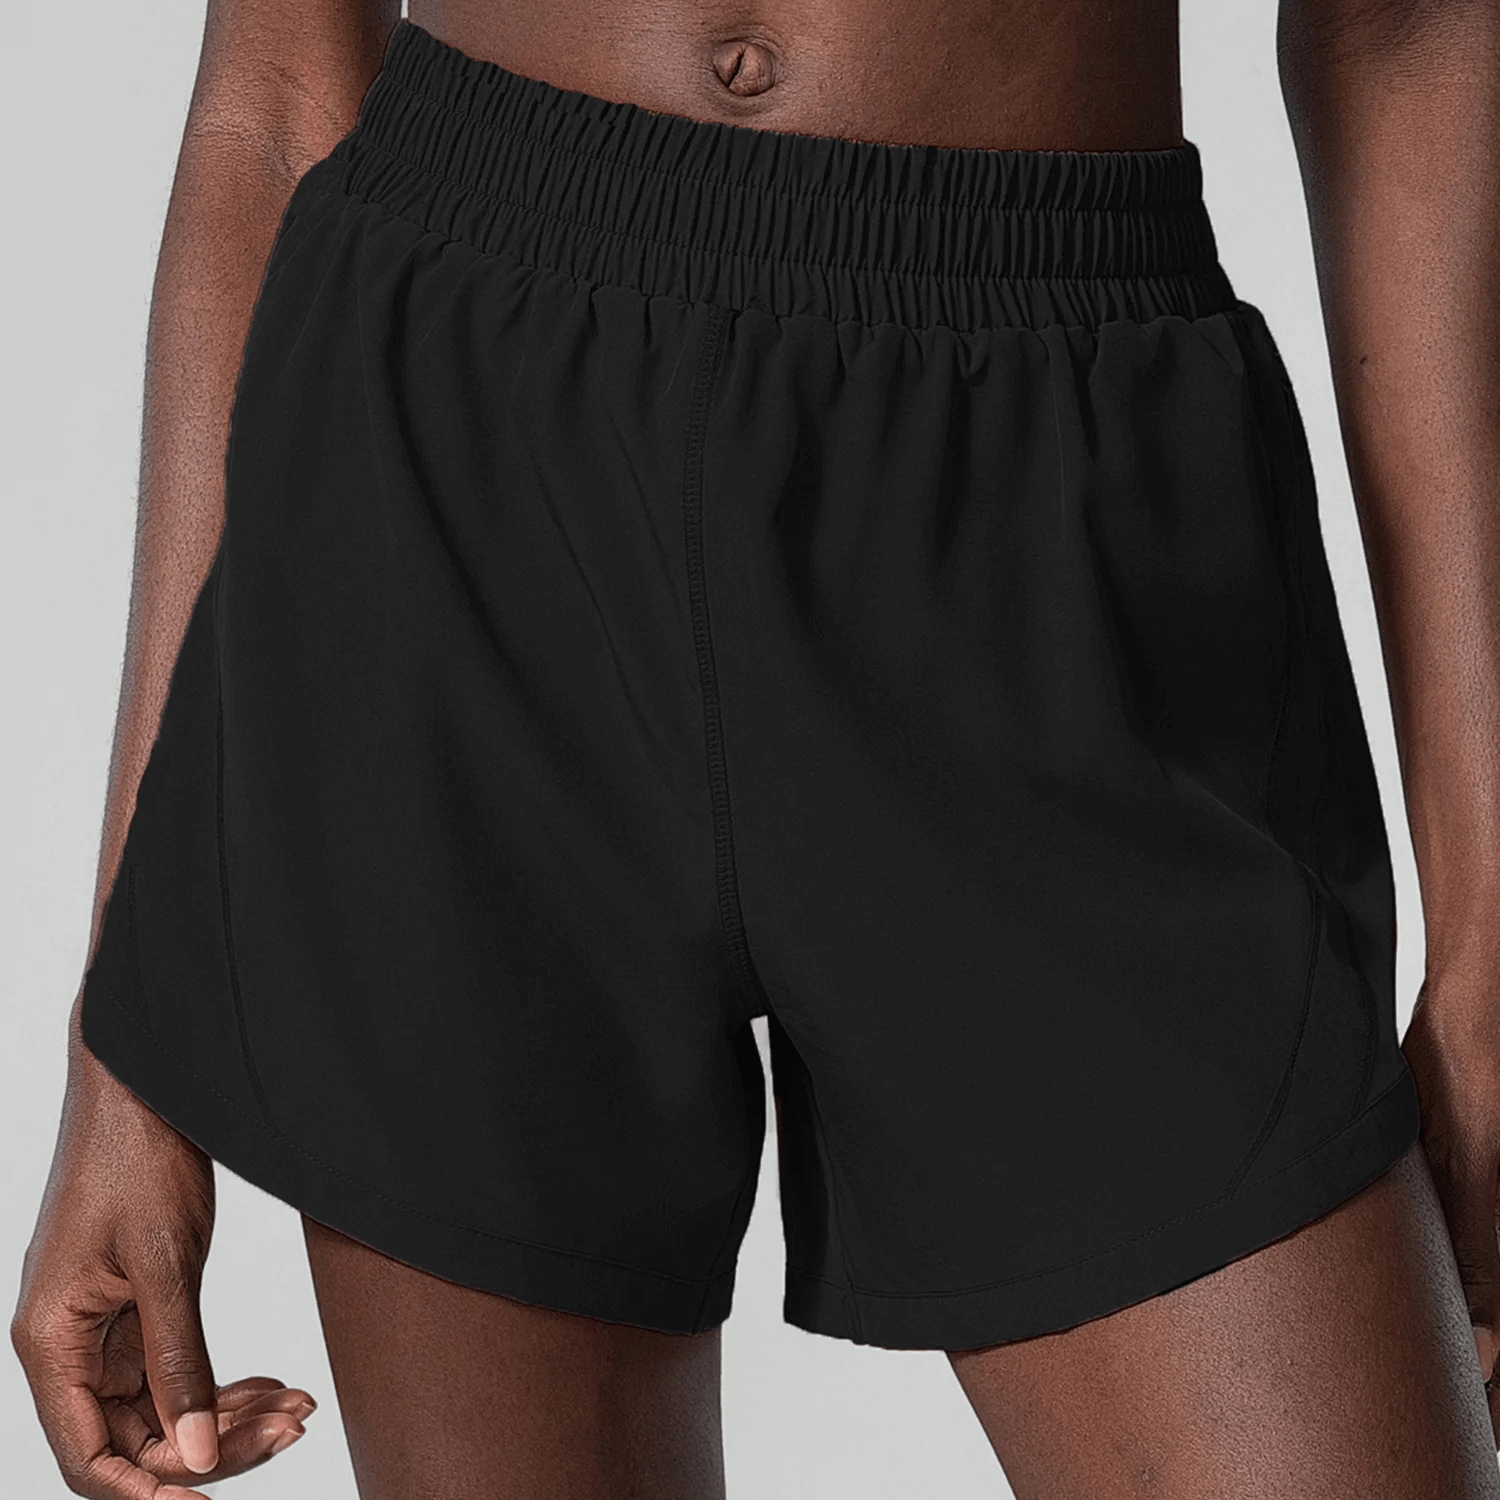 Elastic Waist Shorts 2 In 1 for Active Wear - SF2228